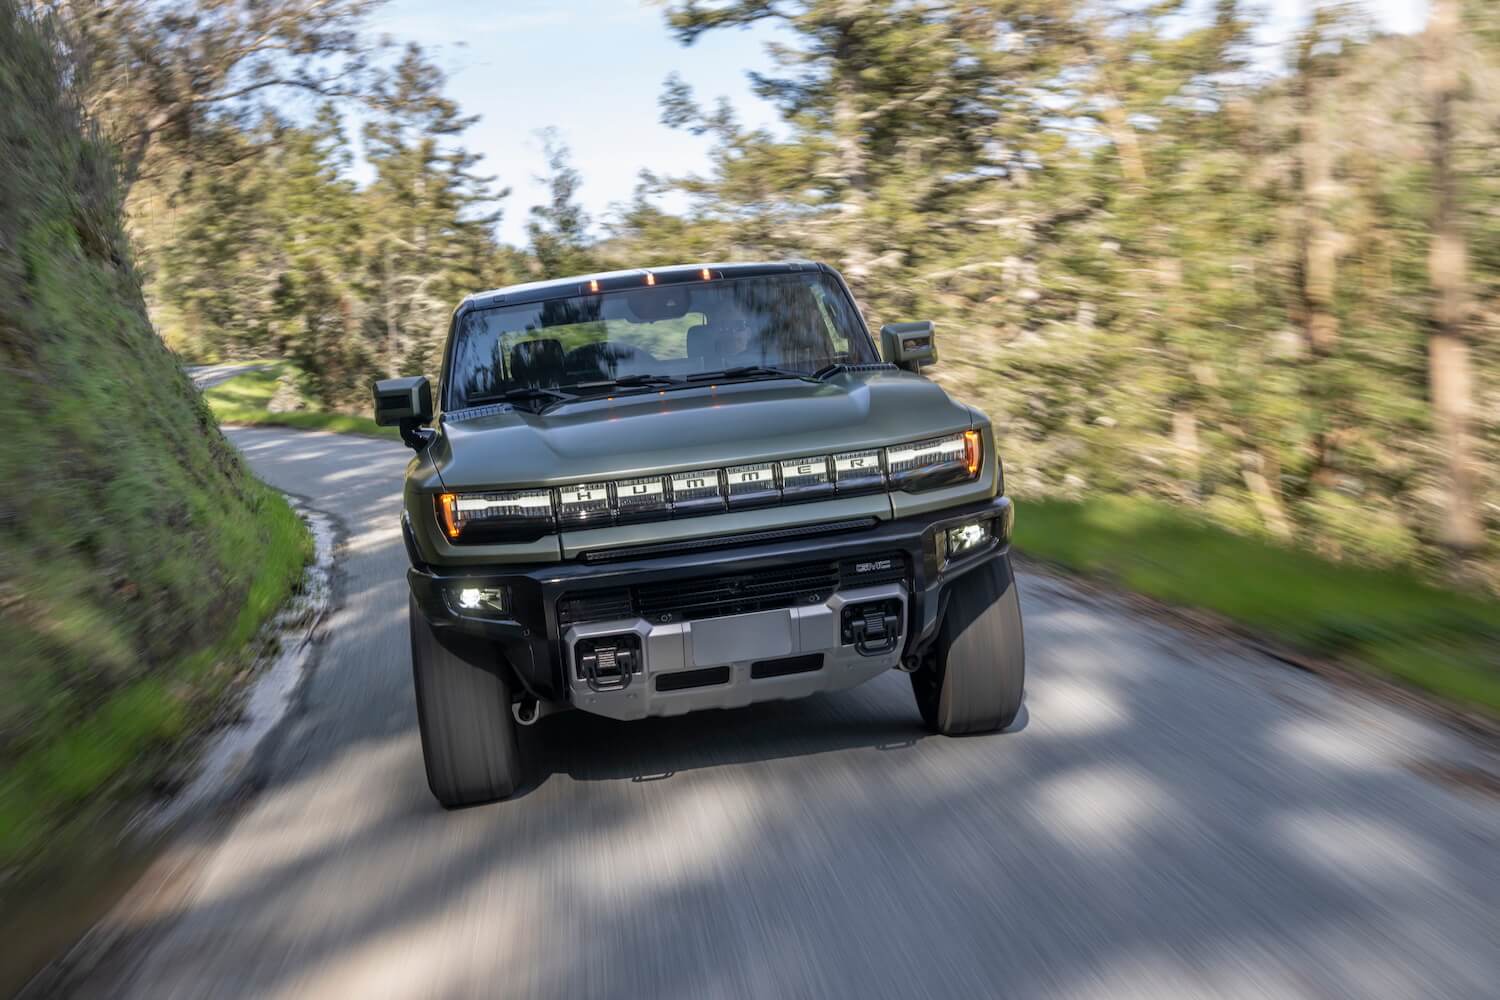 The 2024 GMC Hummer EV driving down a road in the forest.